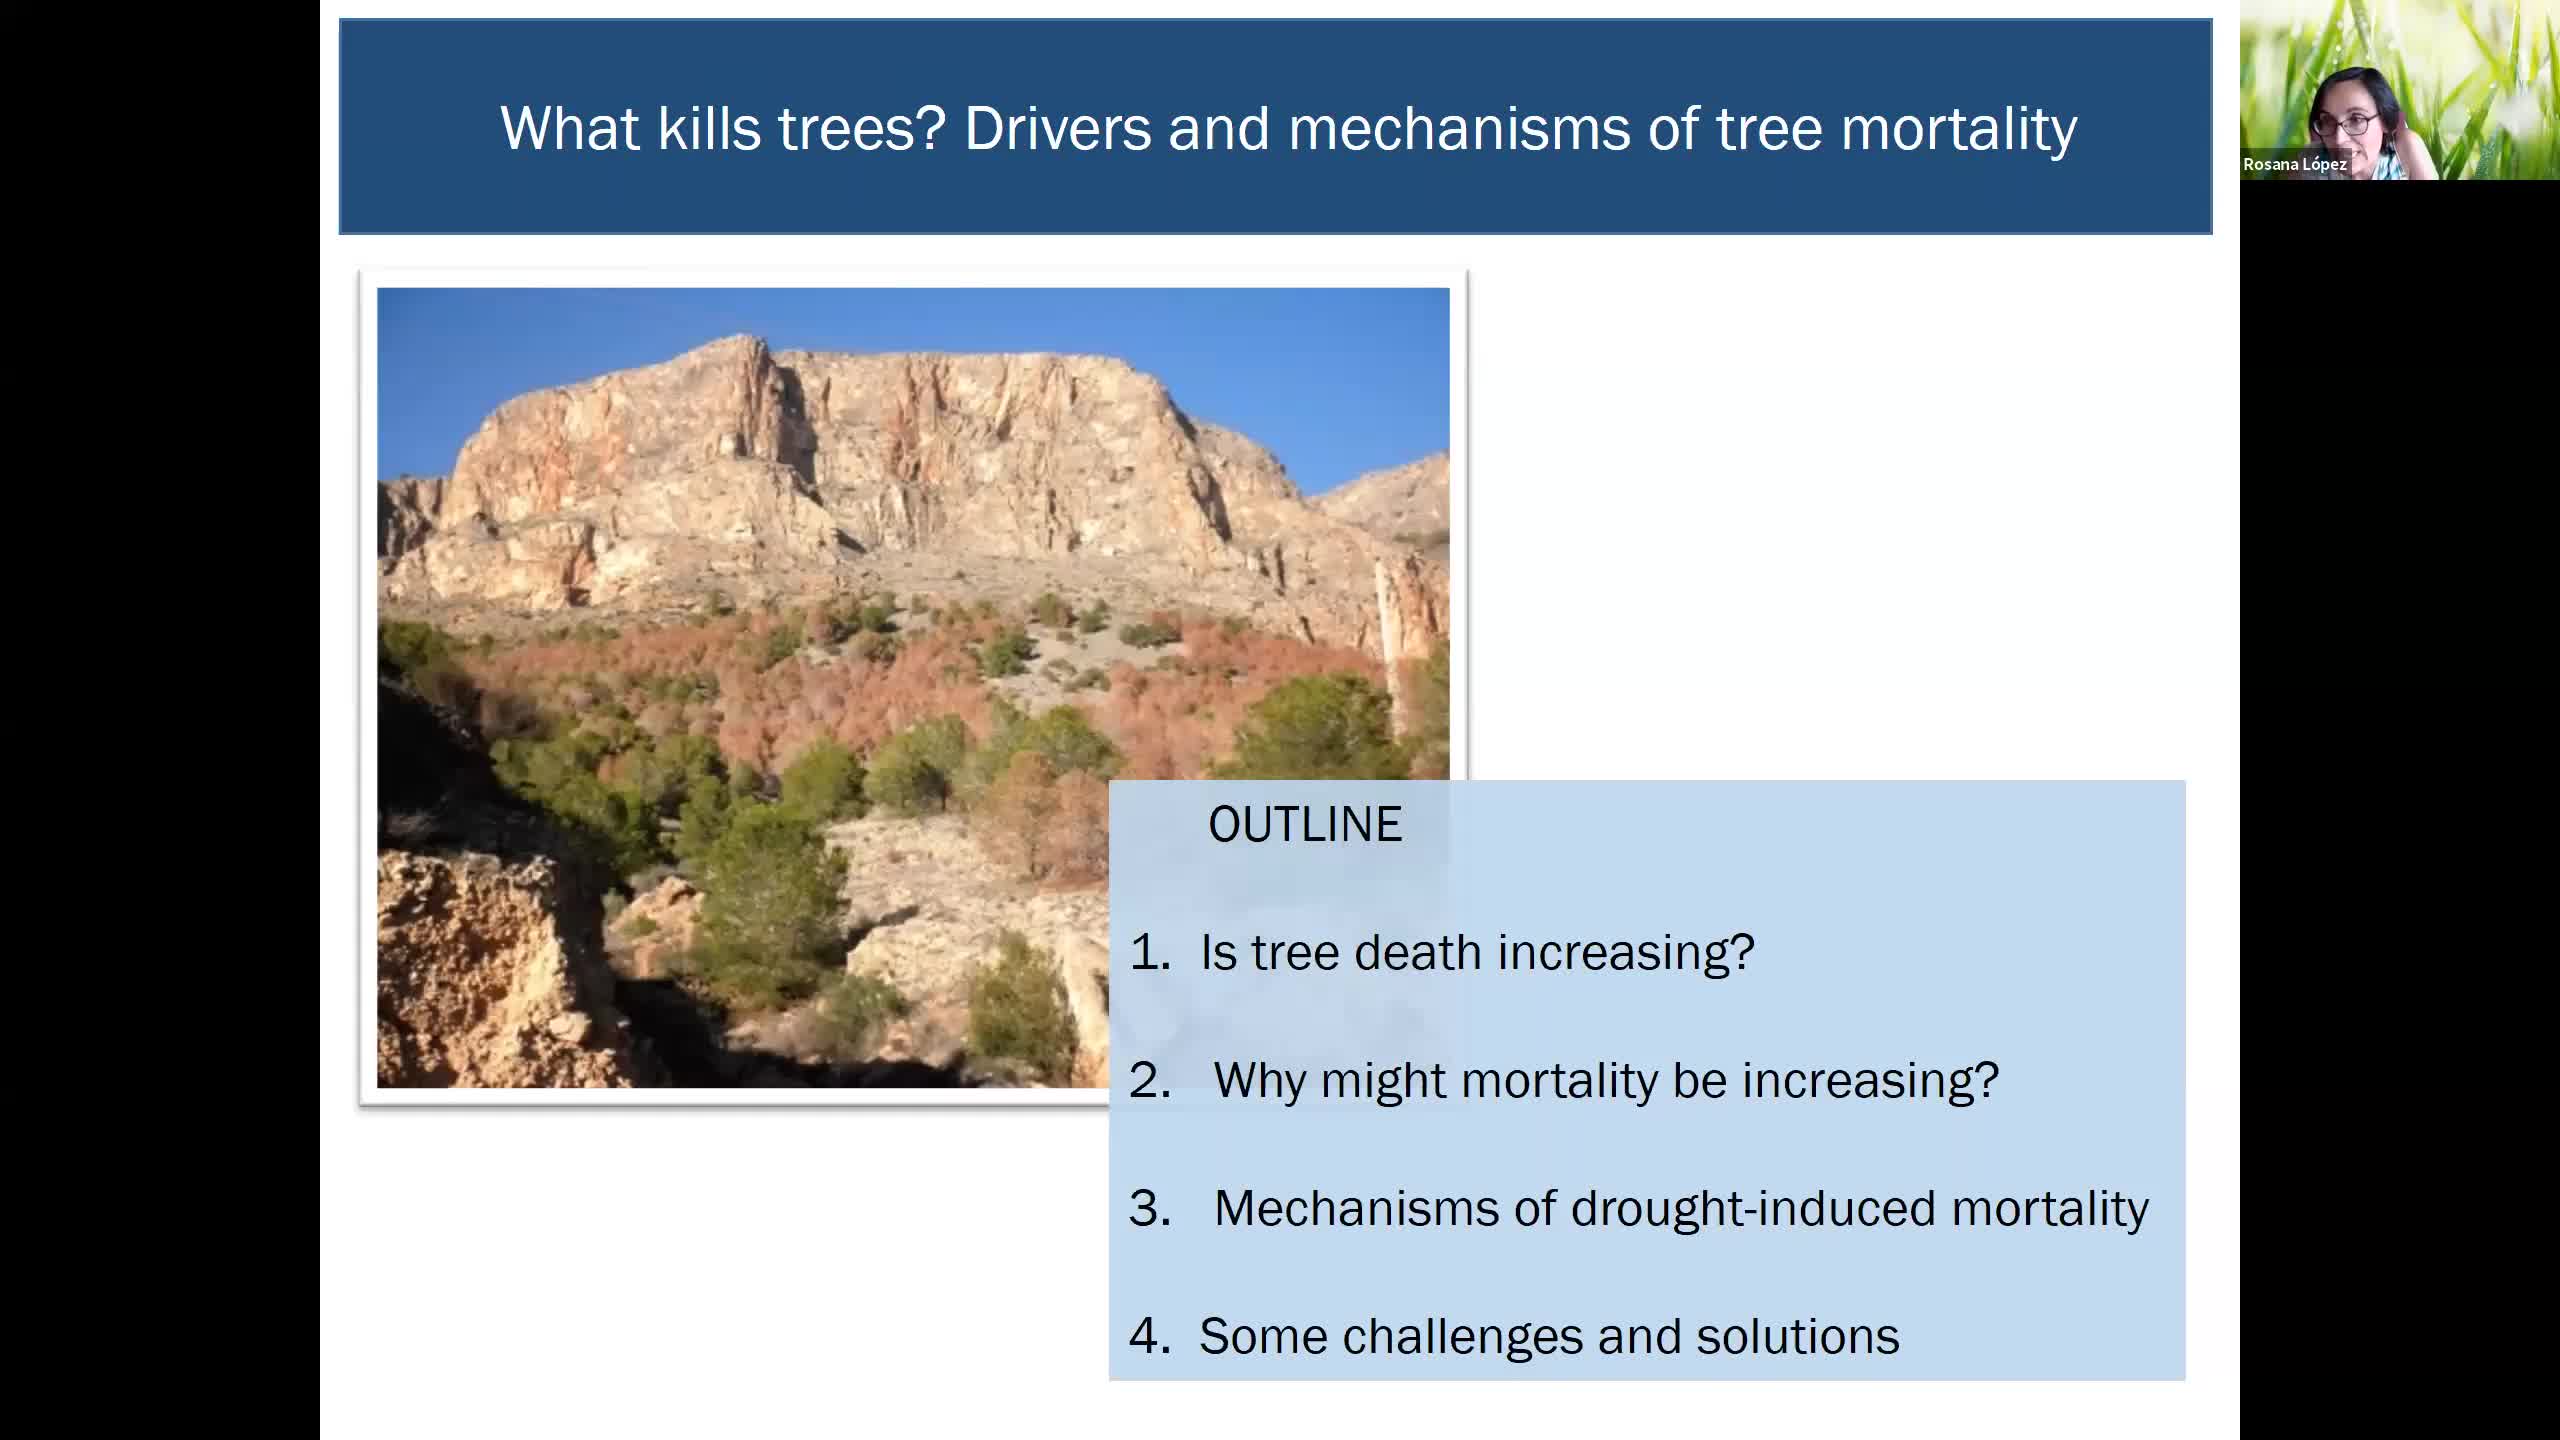 S3- What kills trees? Drivers and mechanisms of tree mortality